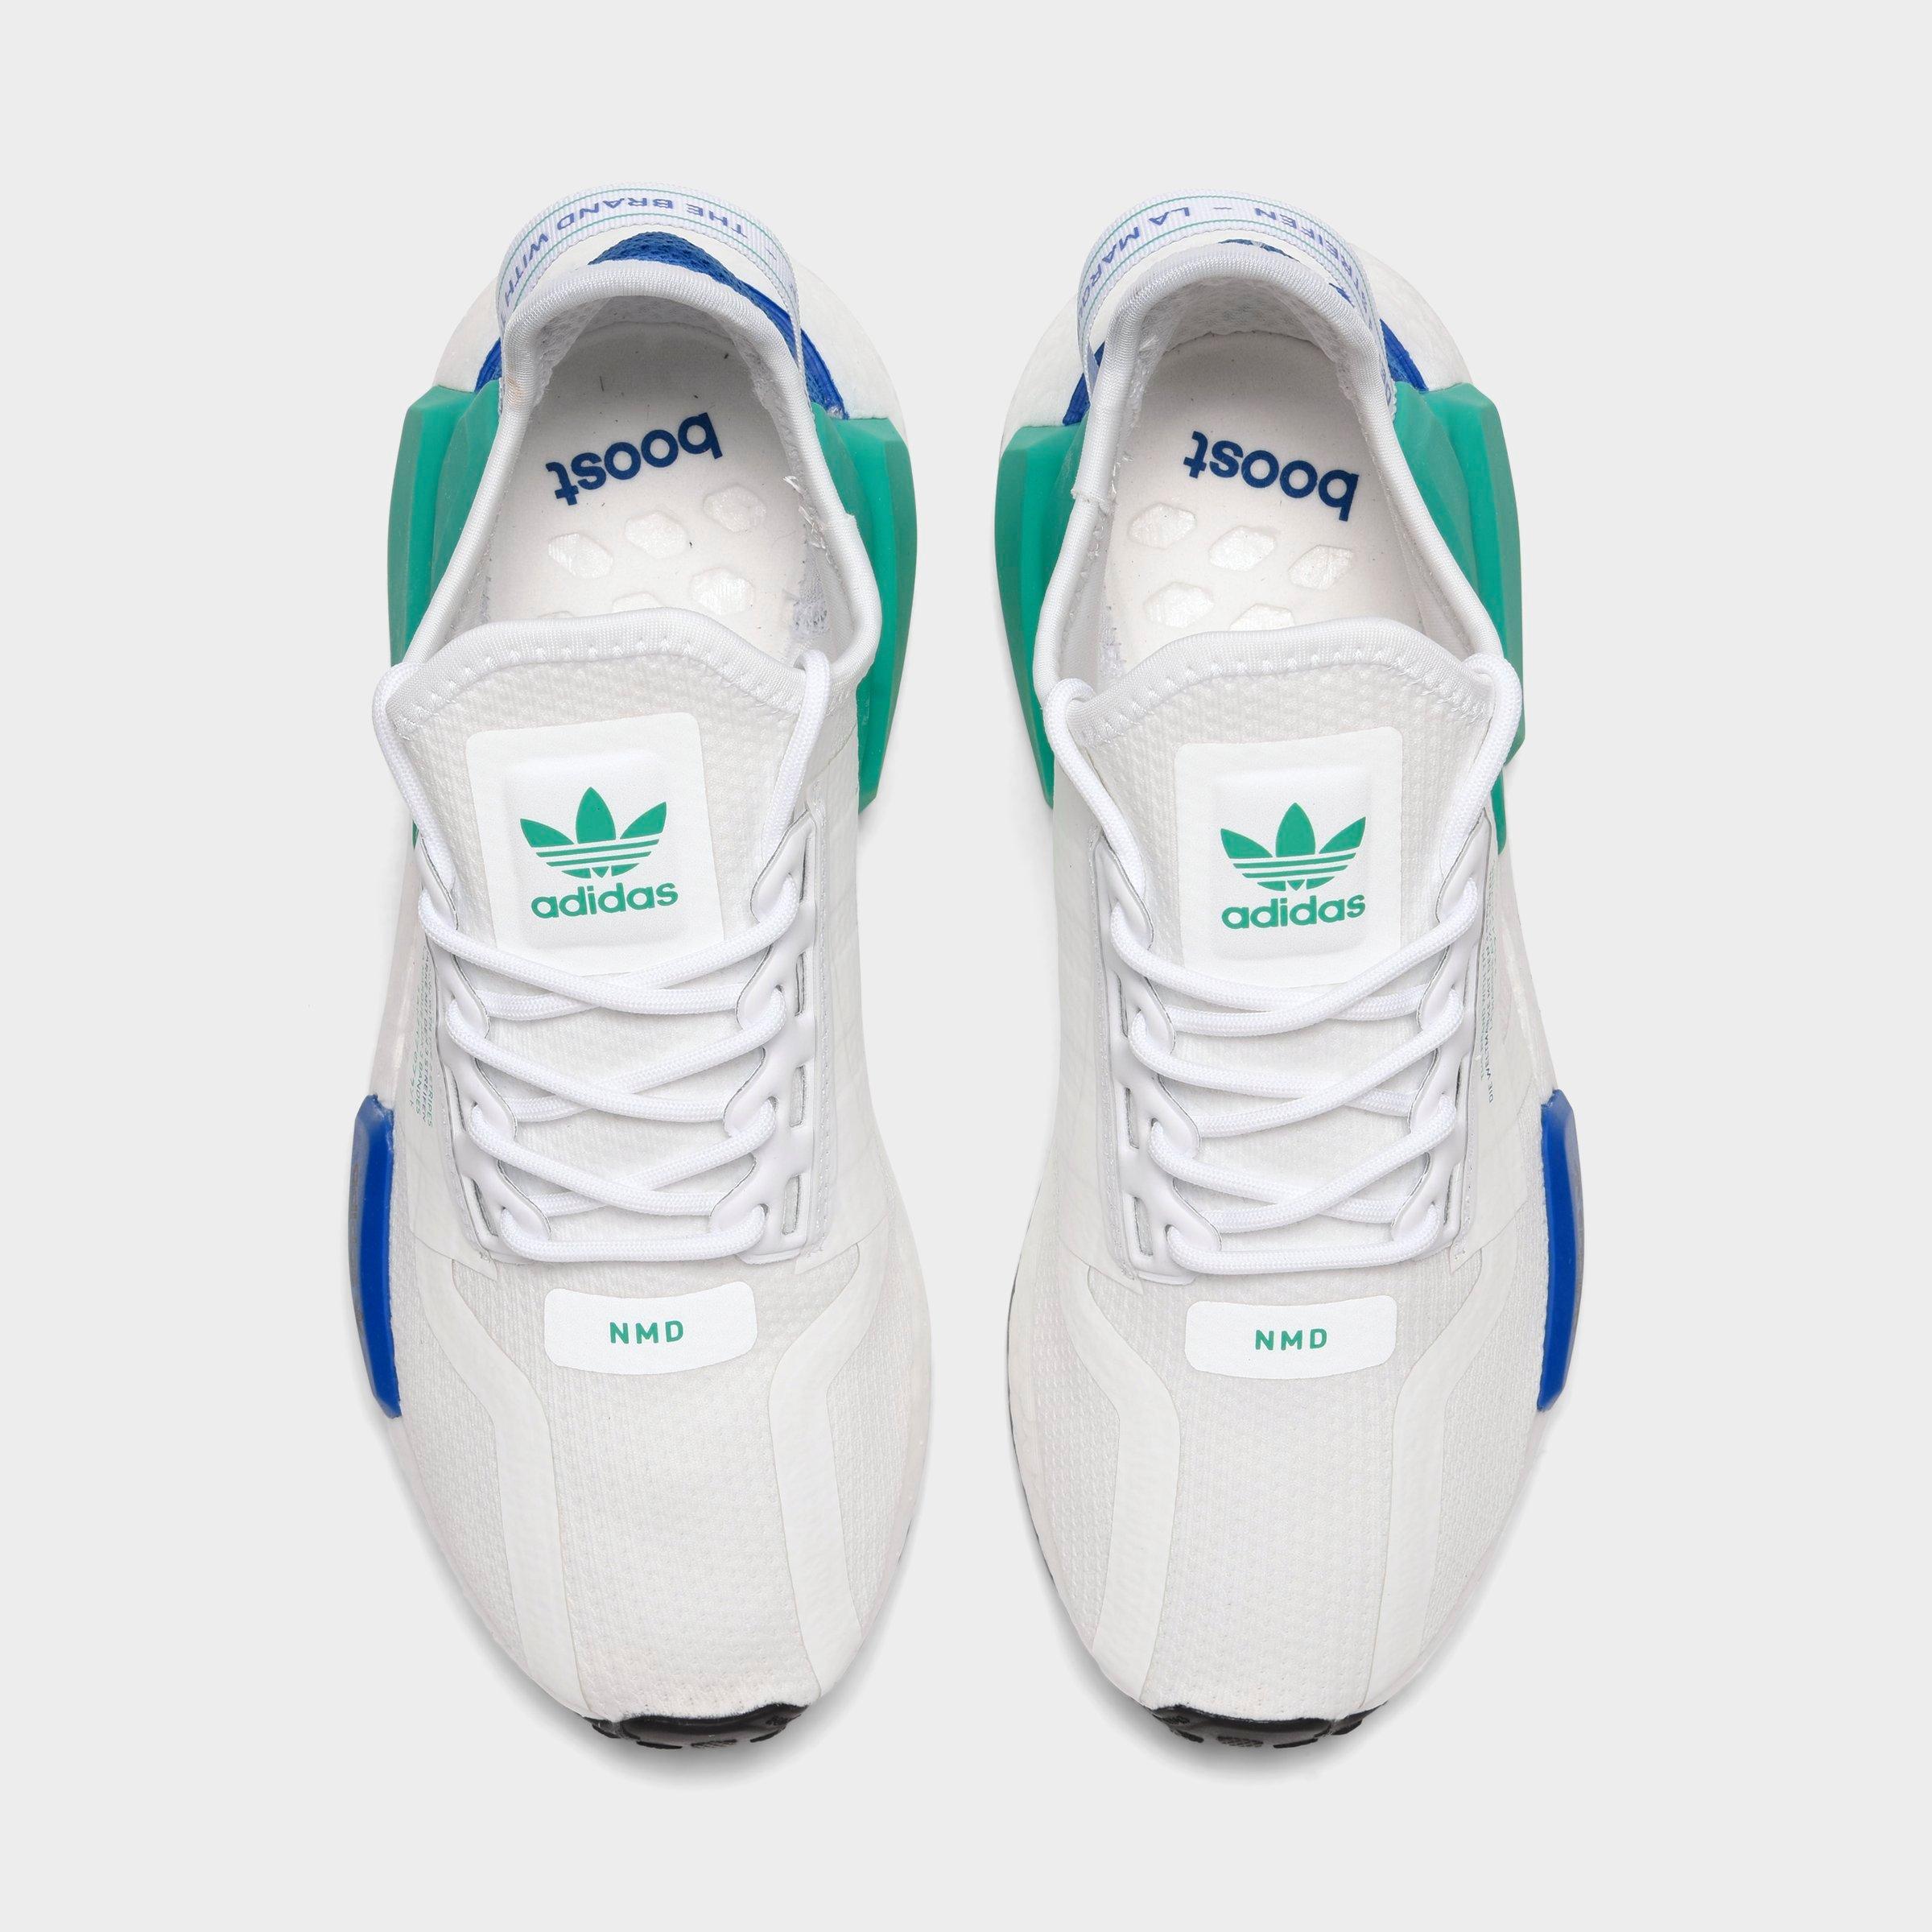 View Adidas Originals Nmd R1 V2 Shoes Mens Free Shipping And Free 30 Day Returns On All Orders Pictures